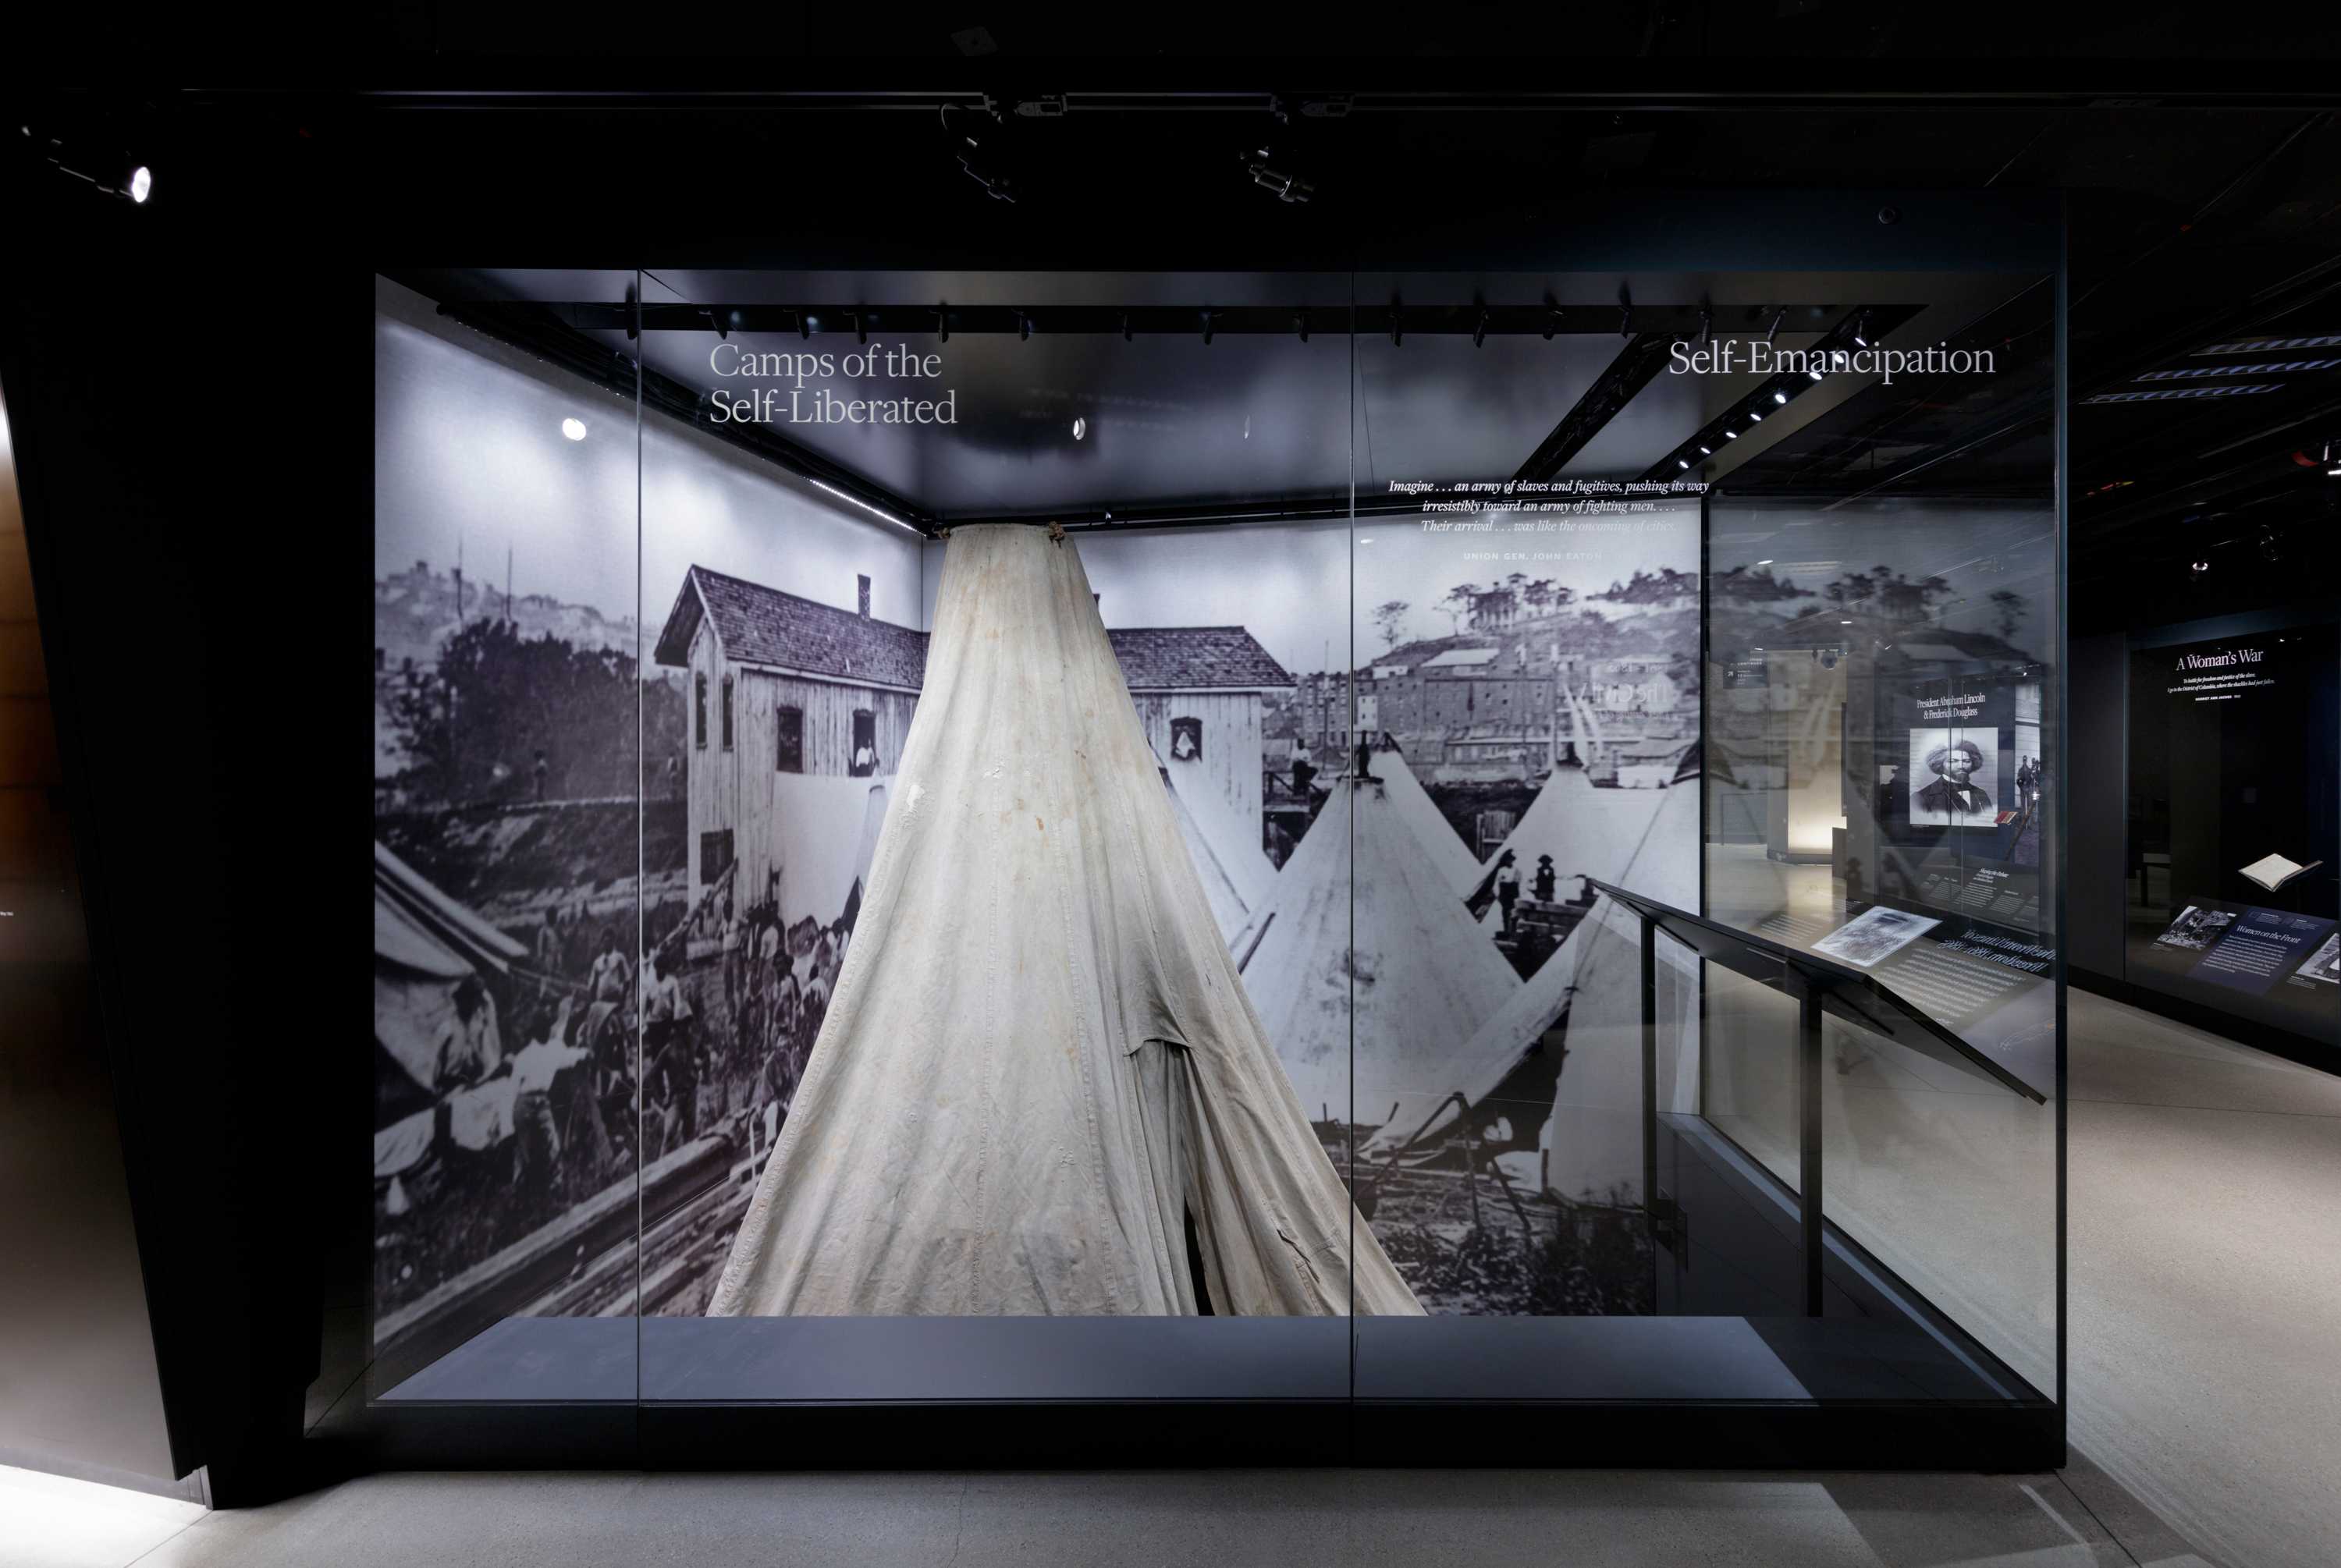 Photograph of Sibley Tent on exhibition at the National Museum of African American History and Culture